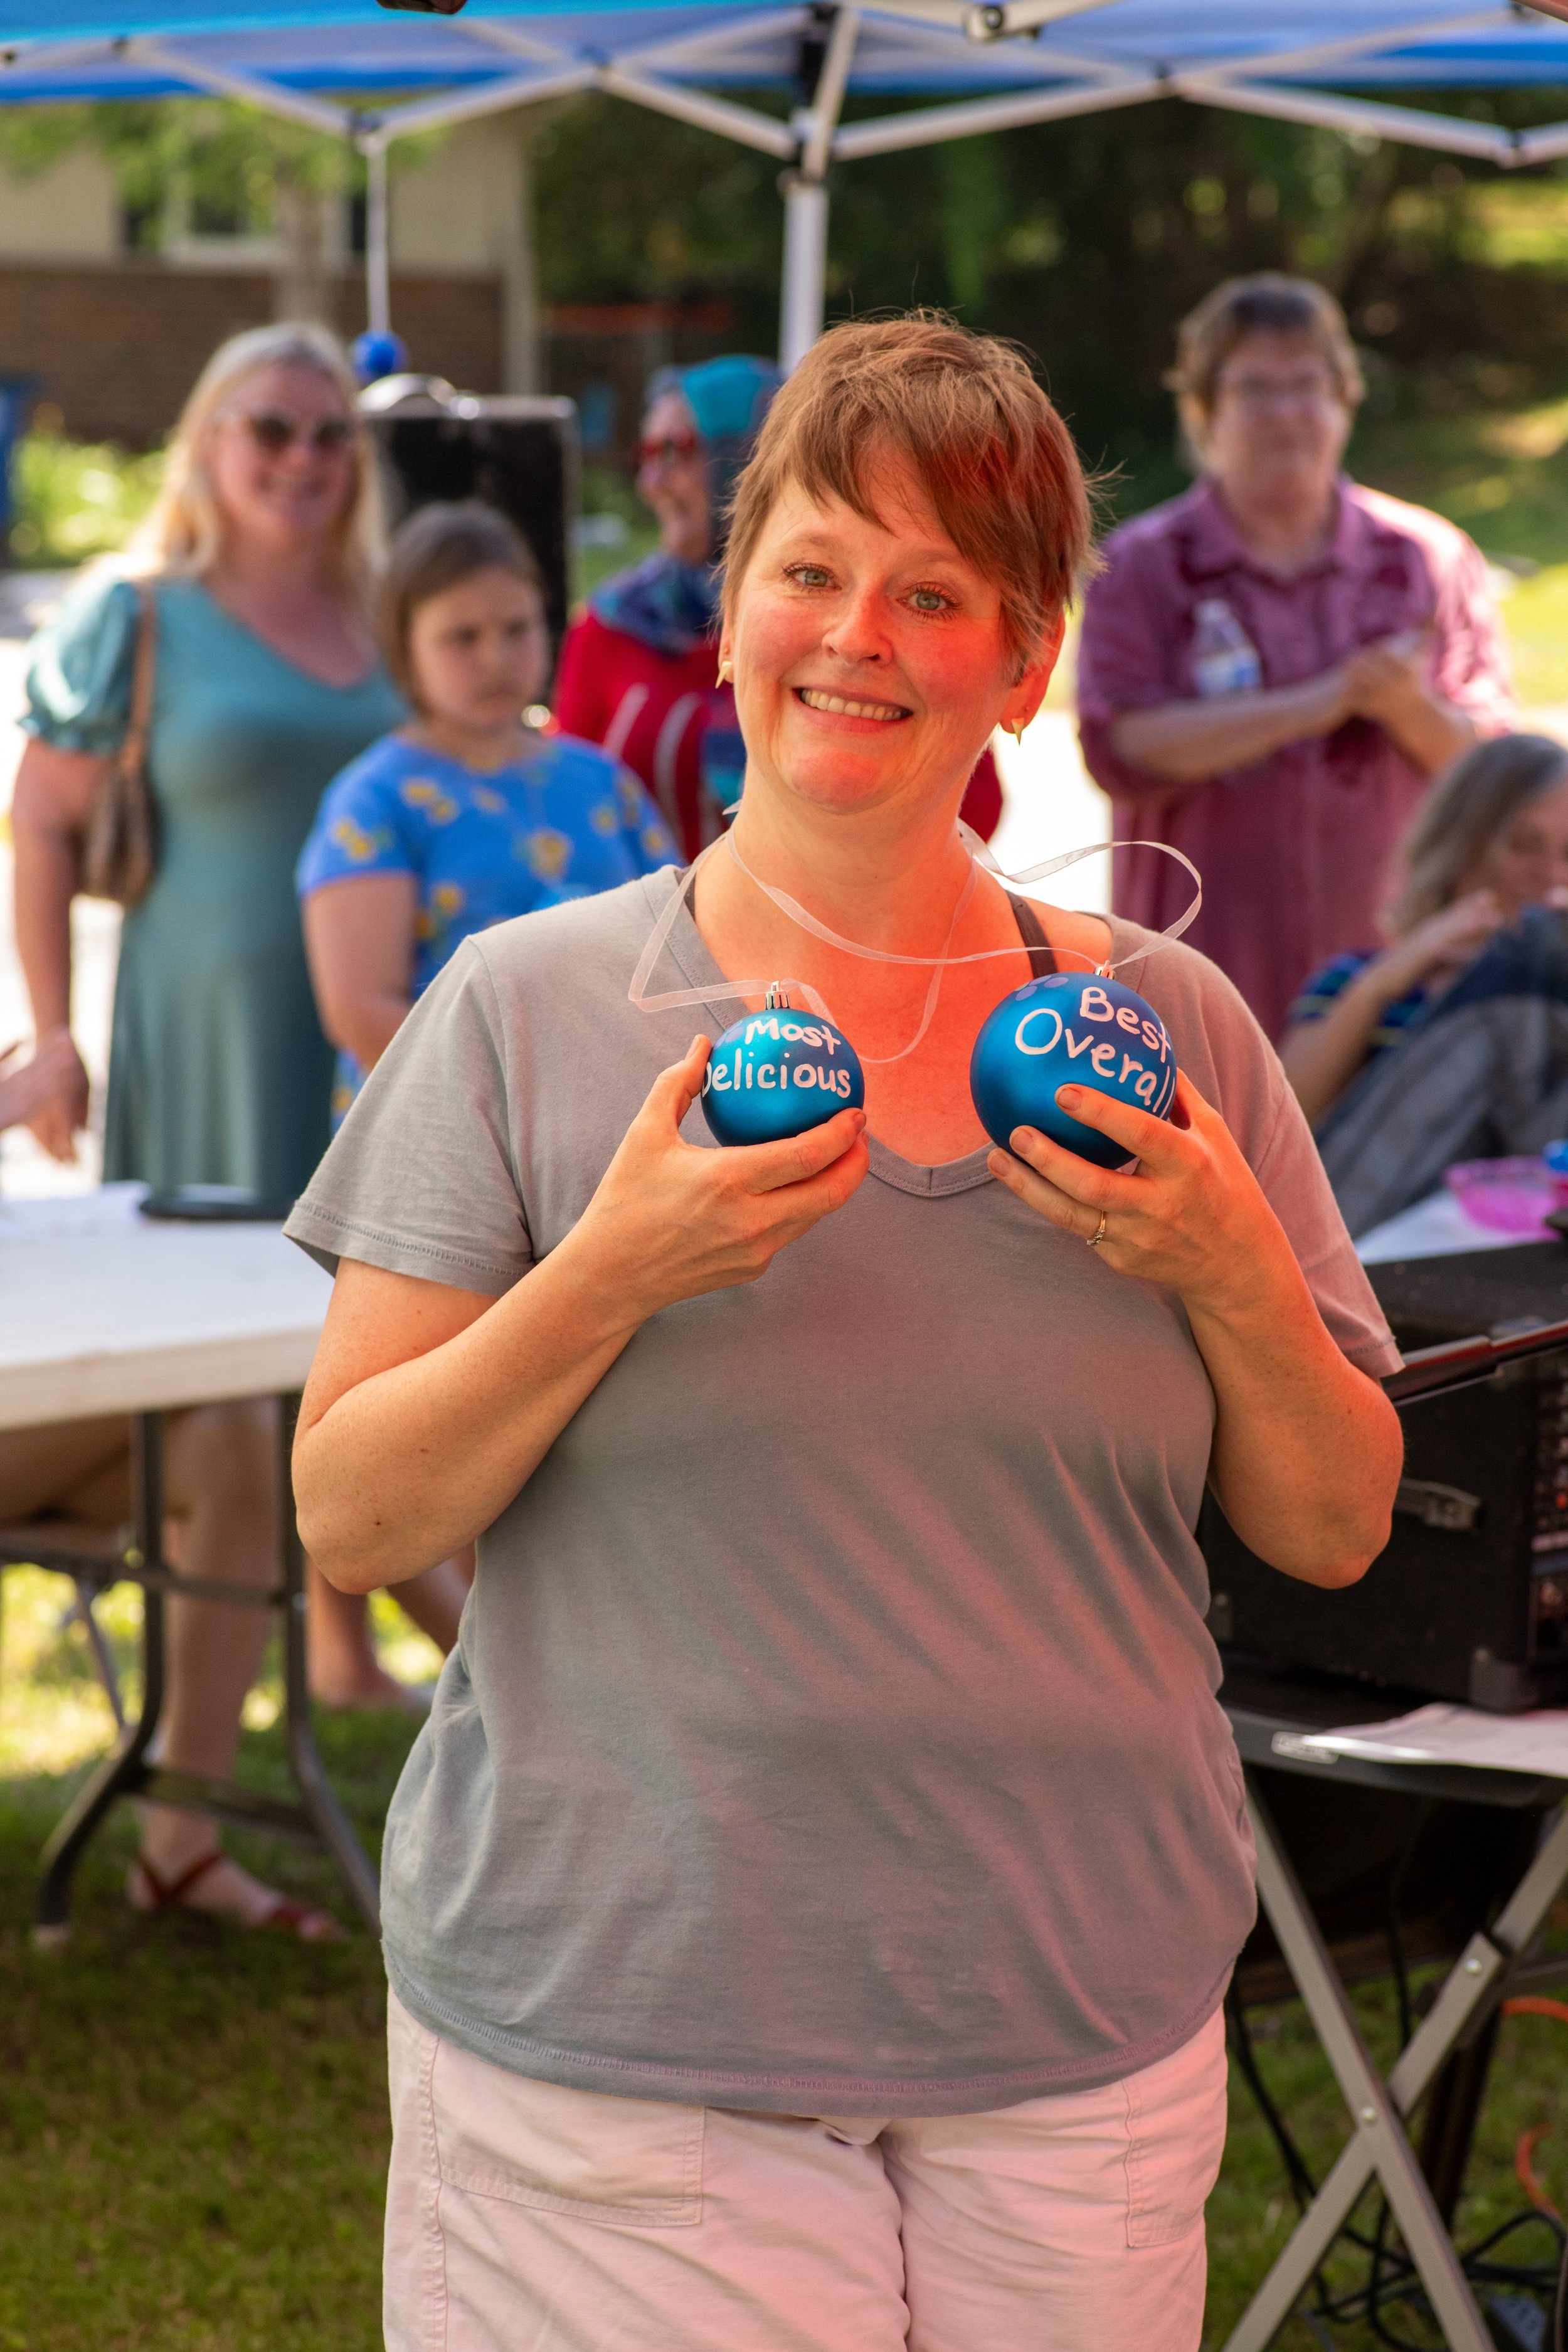  Jennifer Cantwell won ‘Most Delicious’ and ‘Best Overall.’  photo: David DeLaurier 